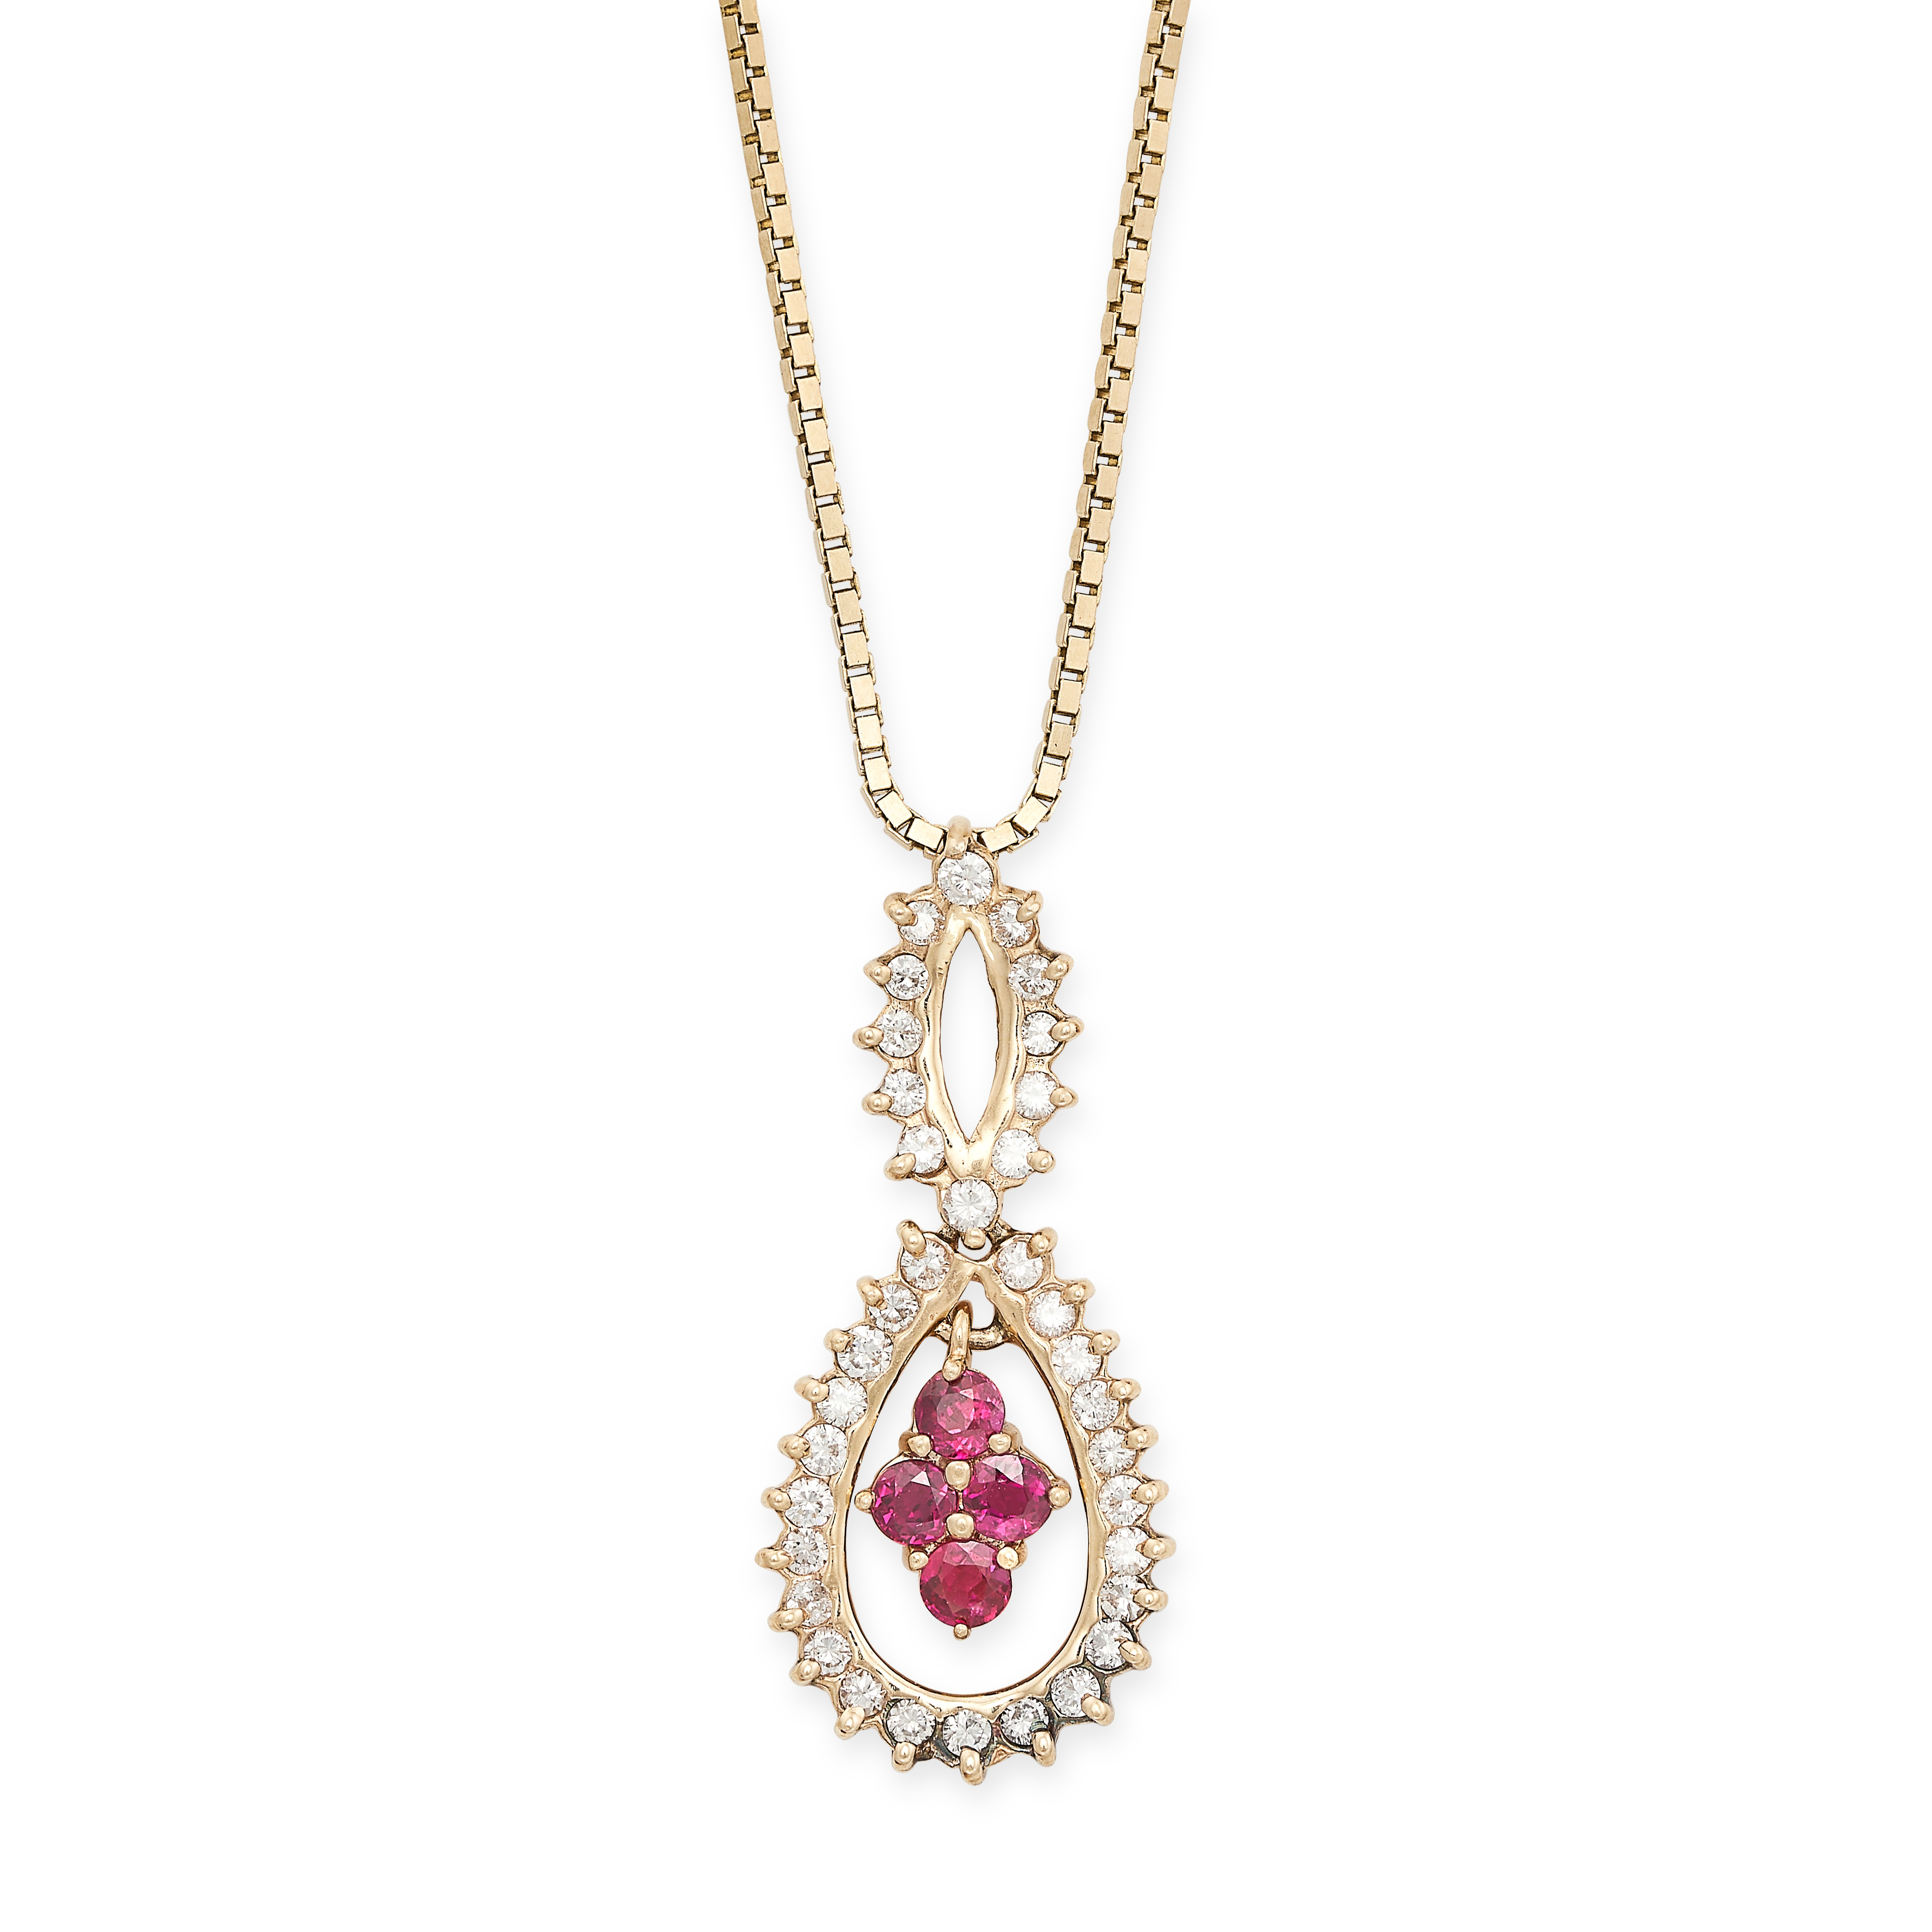 A DIAMOND AND SYNTHETIC RUBY PENDANT NECKLACE the pendant set with a cluster of round cut